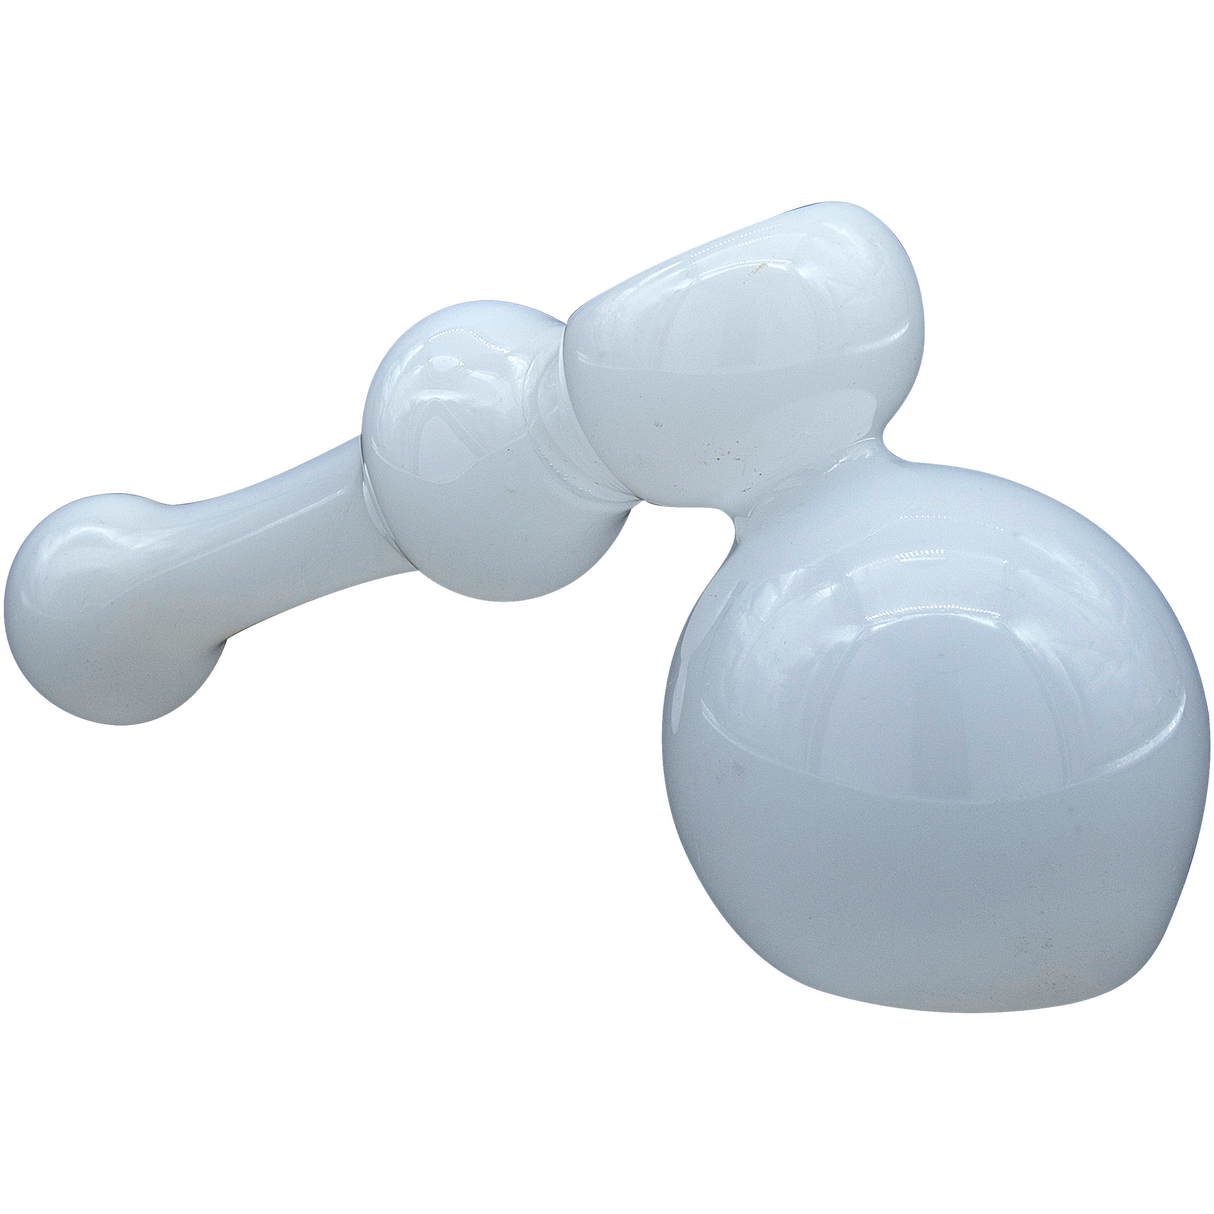 LA Pipes "Ivory Hammer" White Glass Bubbler Pipe, Portable 6" Size for Dry Herbs